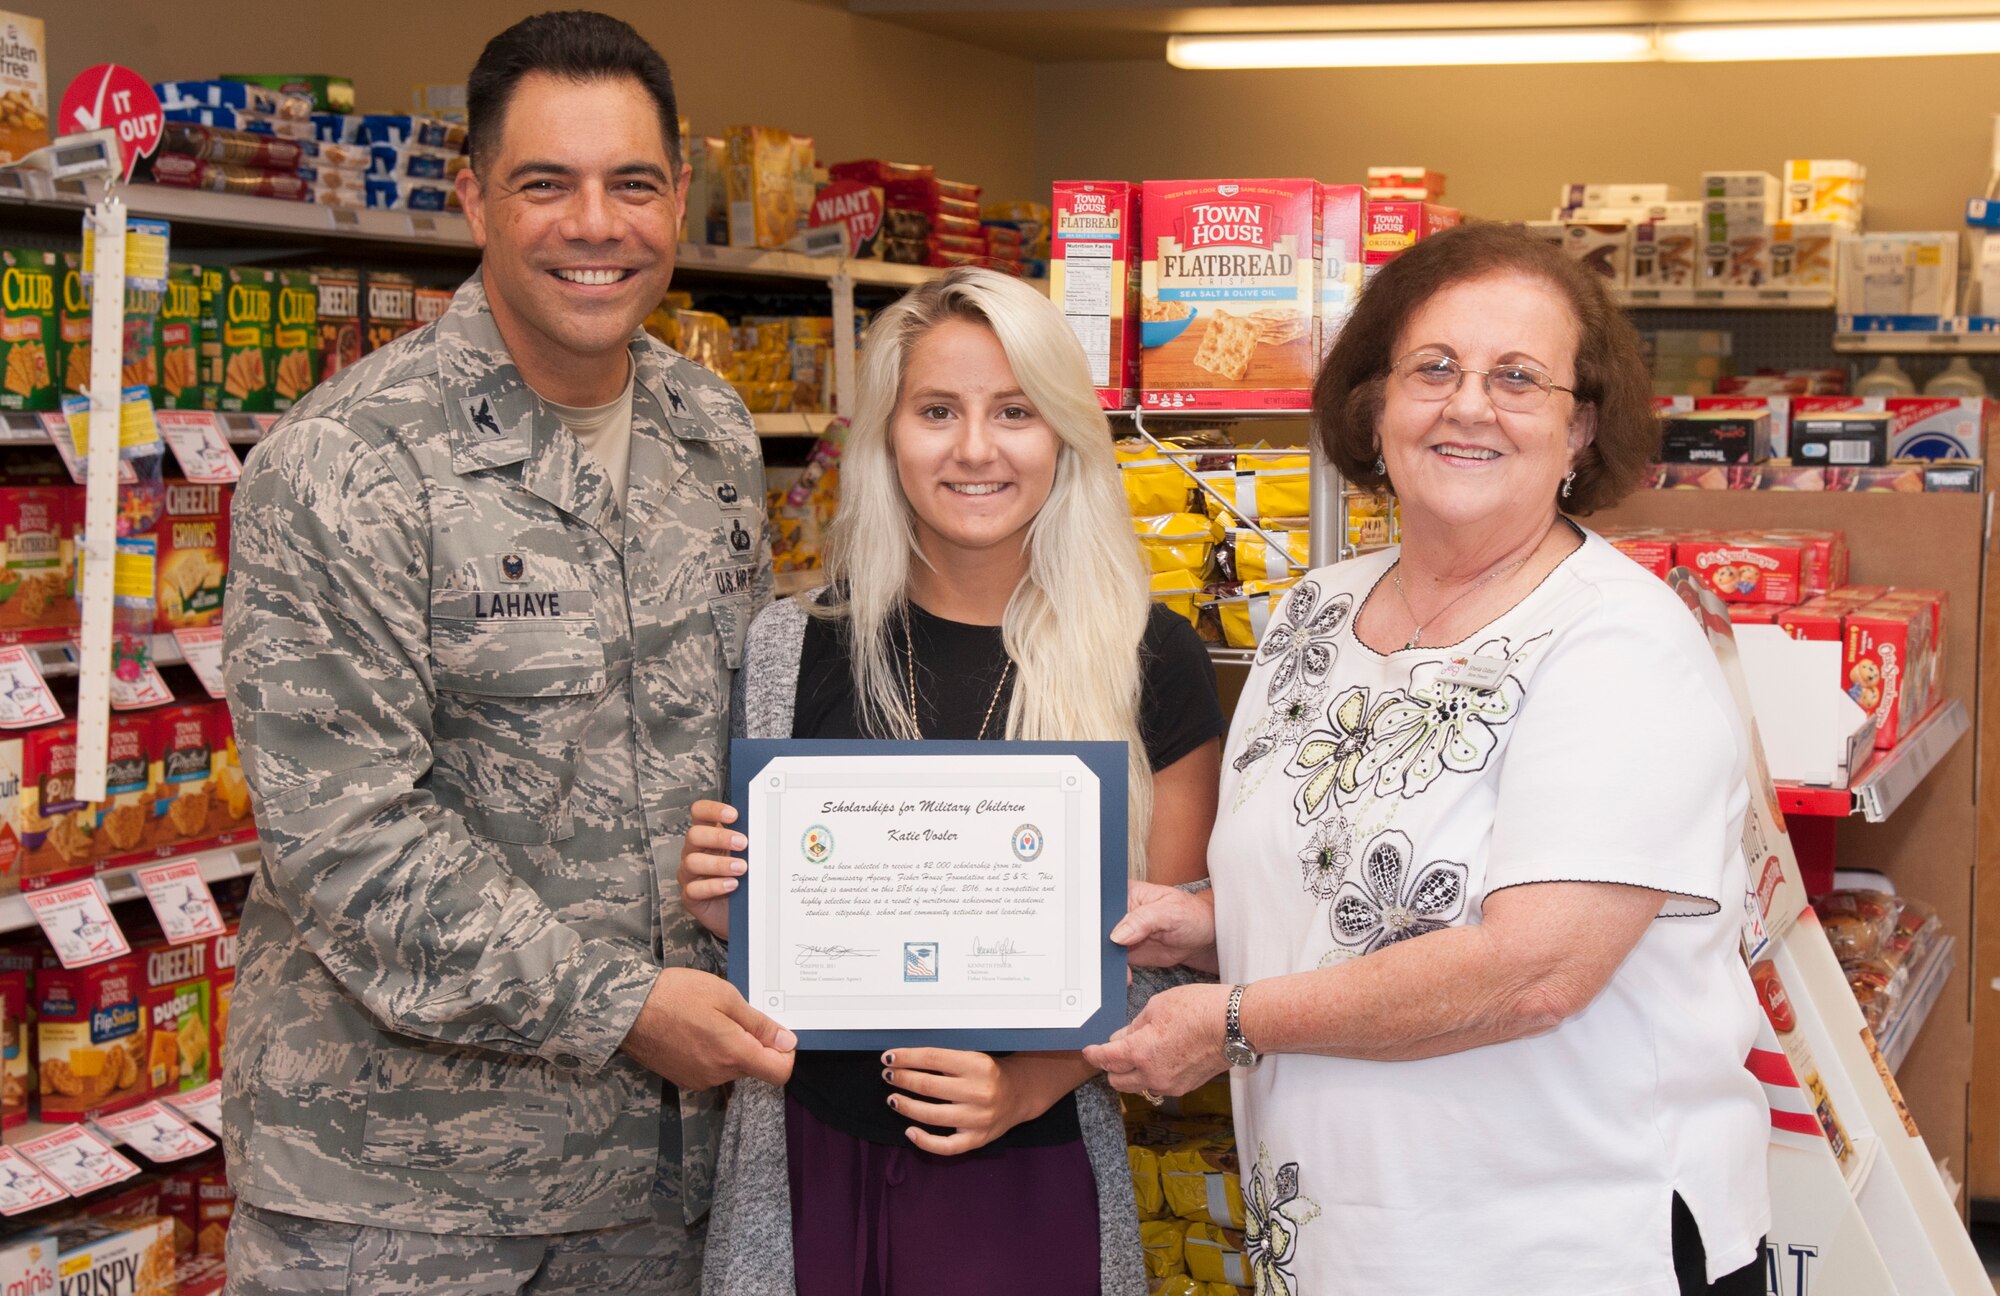 Katie Vosler, center, accepts a $2,000 college scholarship from Col. Dwayne LaHaye, left, the 71st Mission Support Group commander, and Sheila Gilbert, the director of the Vance Air Force Base Commissary, during a brief ceremony at the Commissary June 28. (U.S. Air Force photo by Tech. Sgt. James Bolinger)